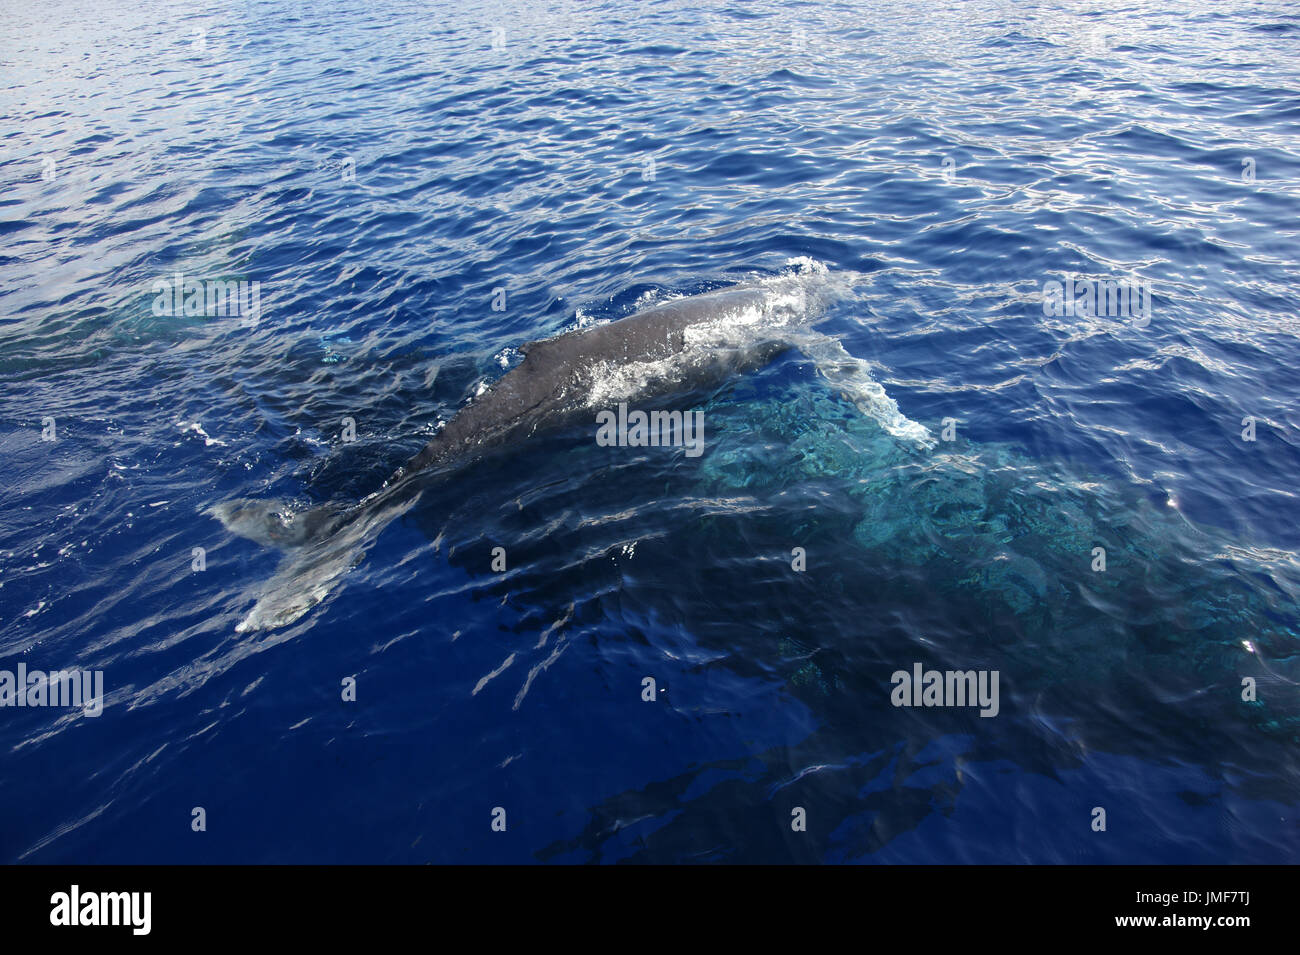 A young Humpback whale (Megaptera novaeangliae) swims above its mother at the surface of the Hawaiian Sea Stock Photo